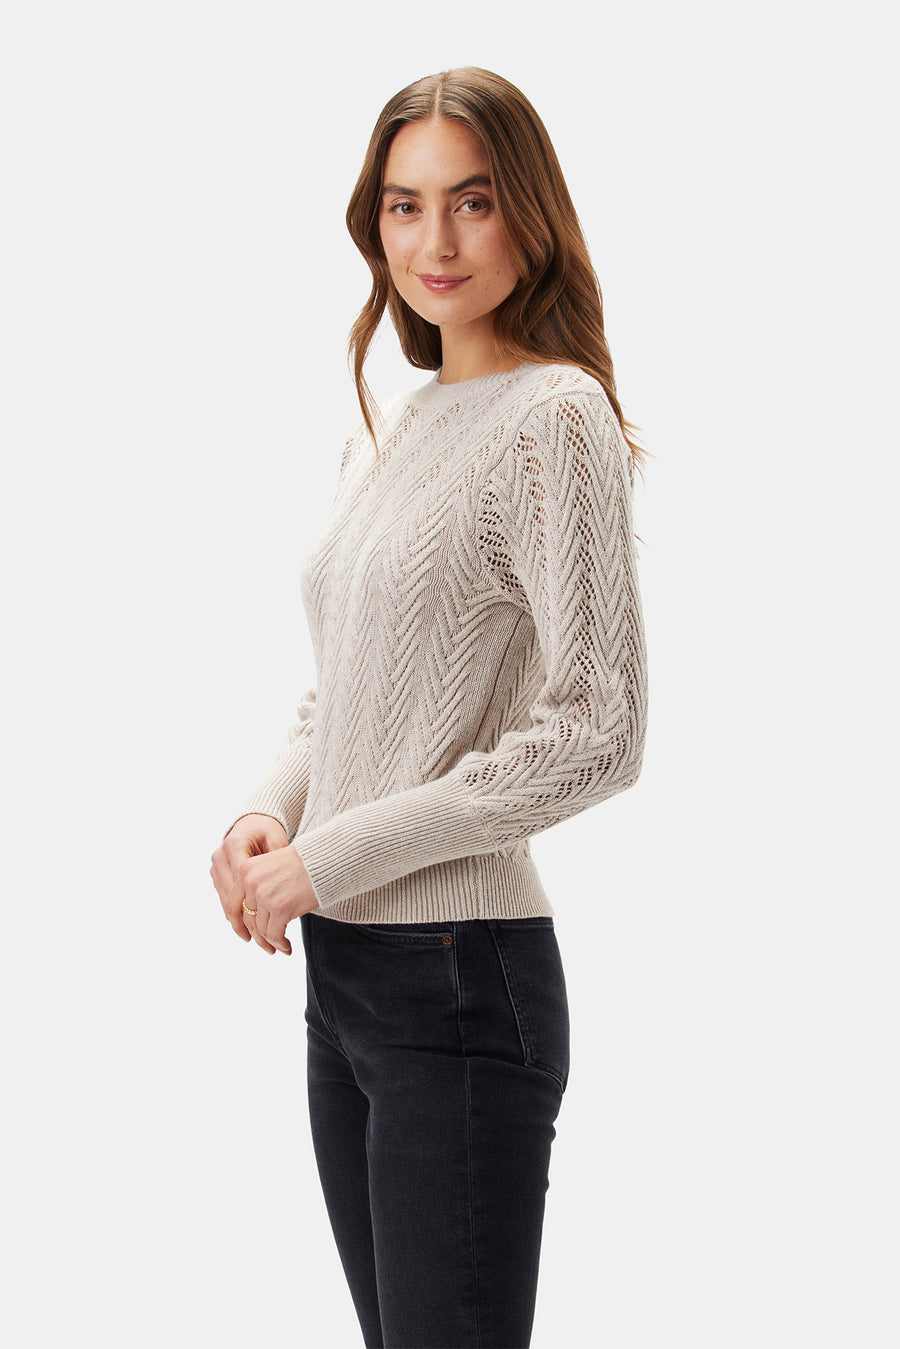 Clementine Sweater - Oatmeal